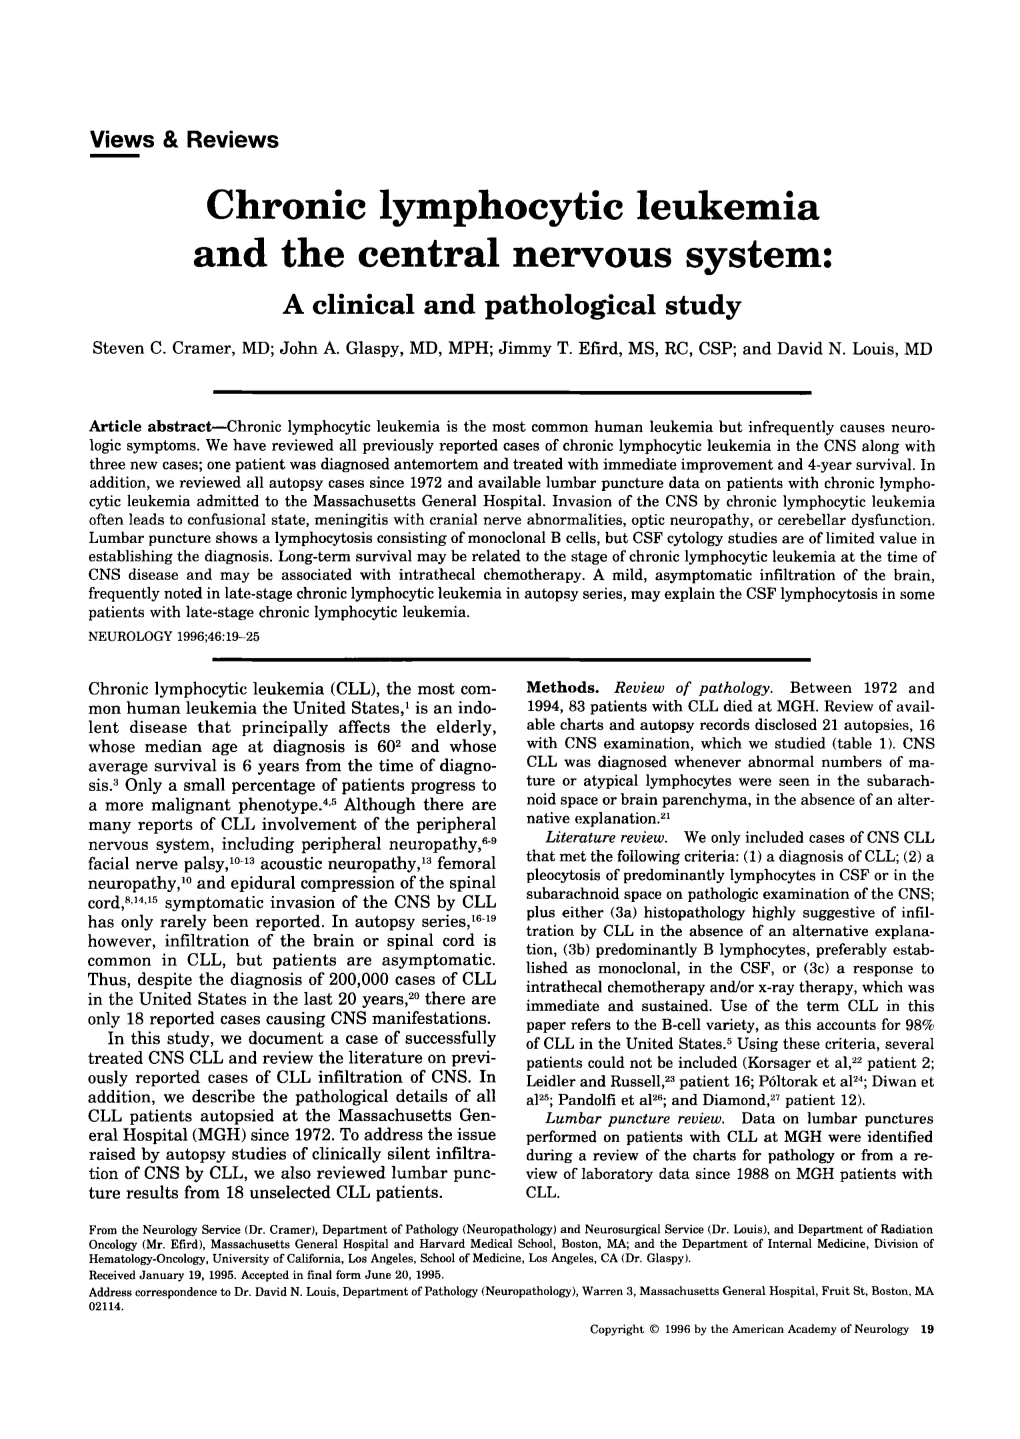 Chronic Lymphocytic Leukemia and the Central Nervous System: a Clinical and Pathological Study